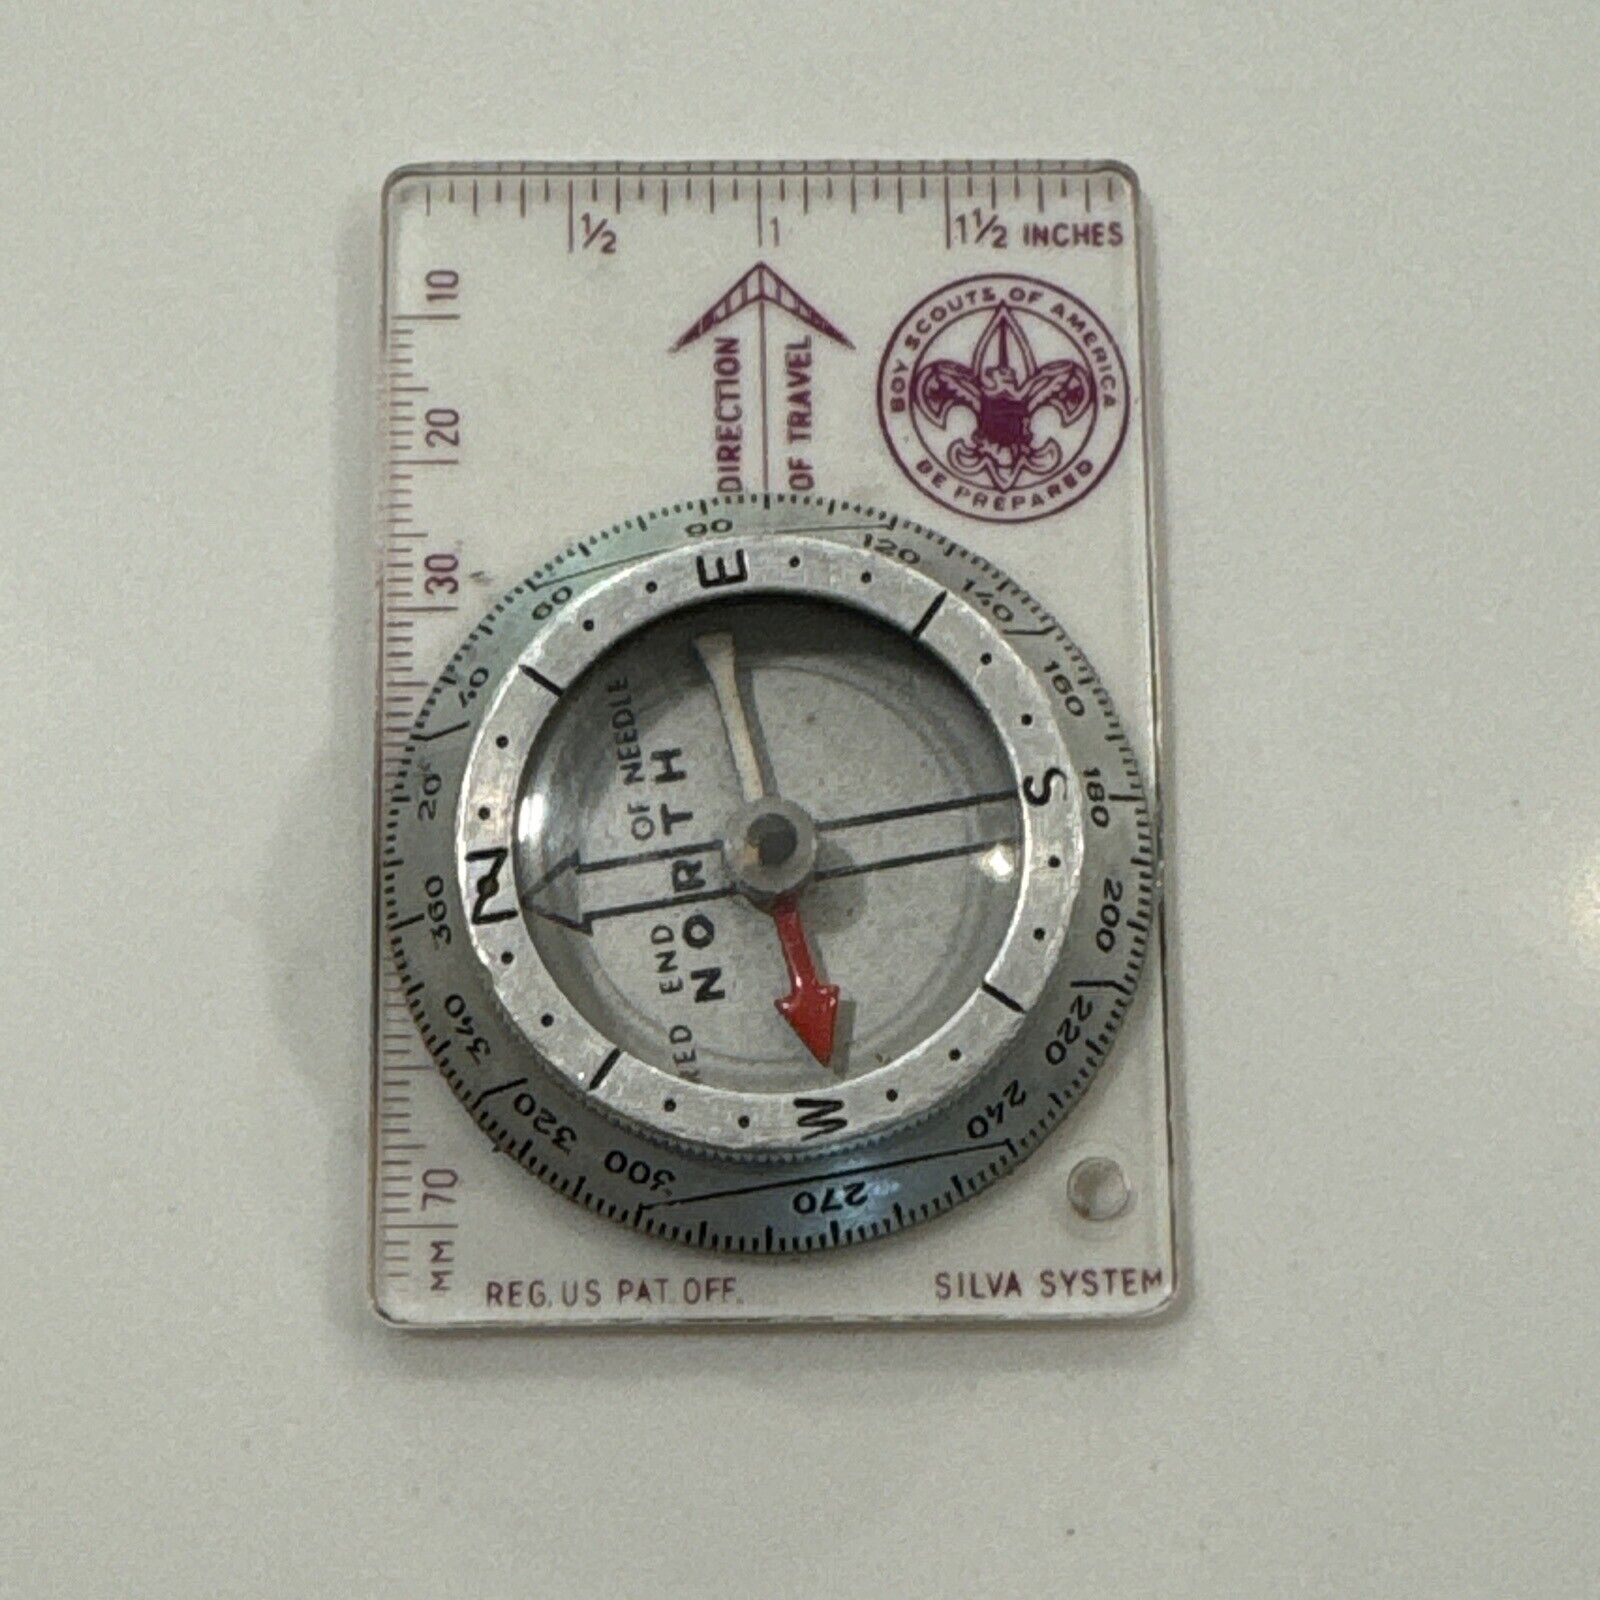 Boy Scouts of America Compass Silva System